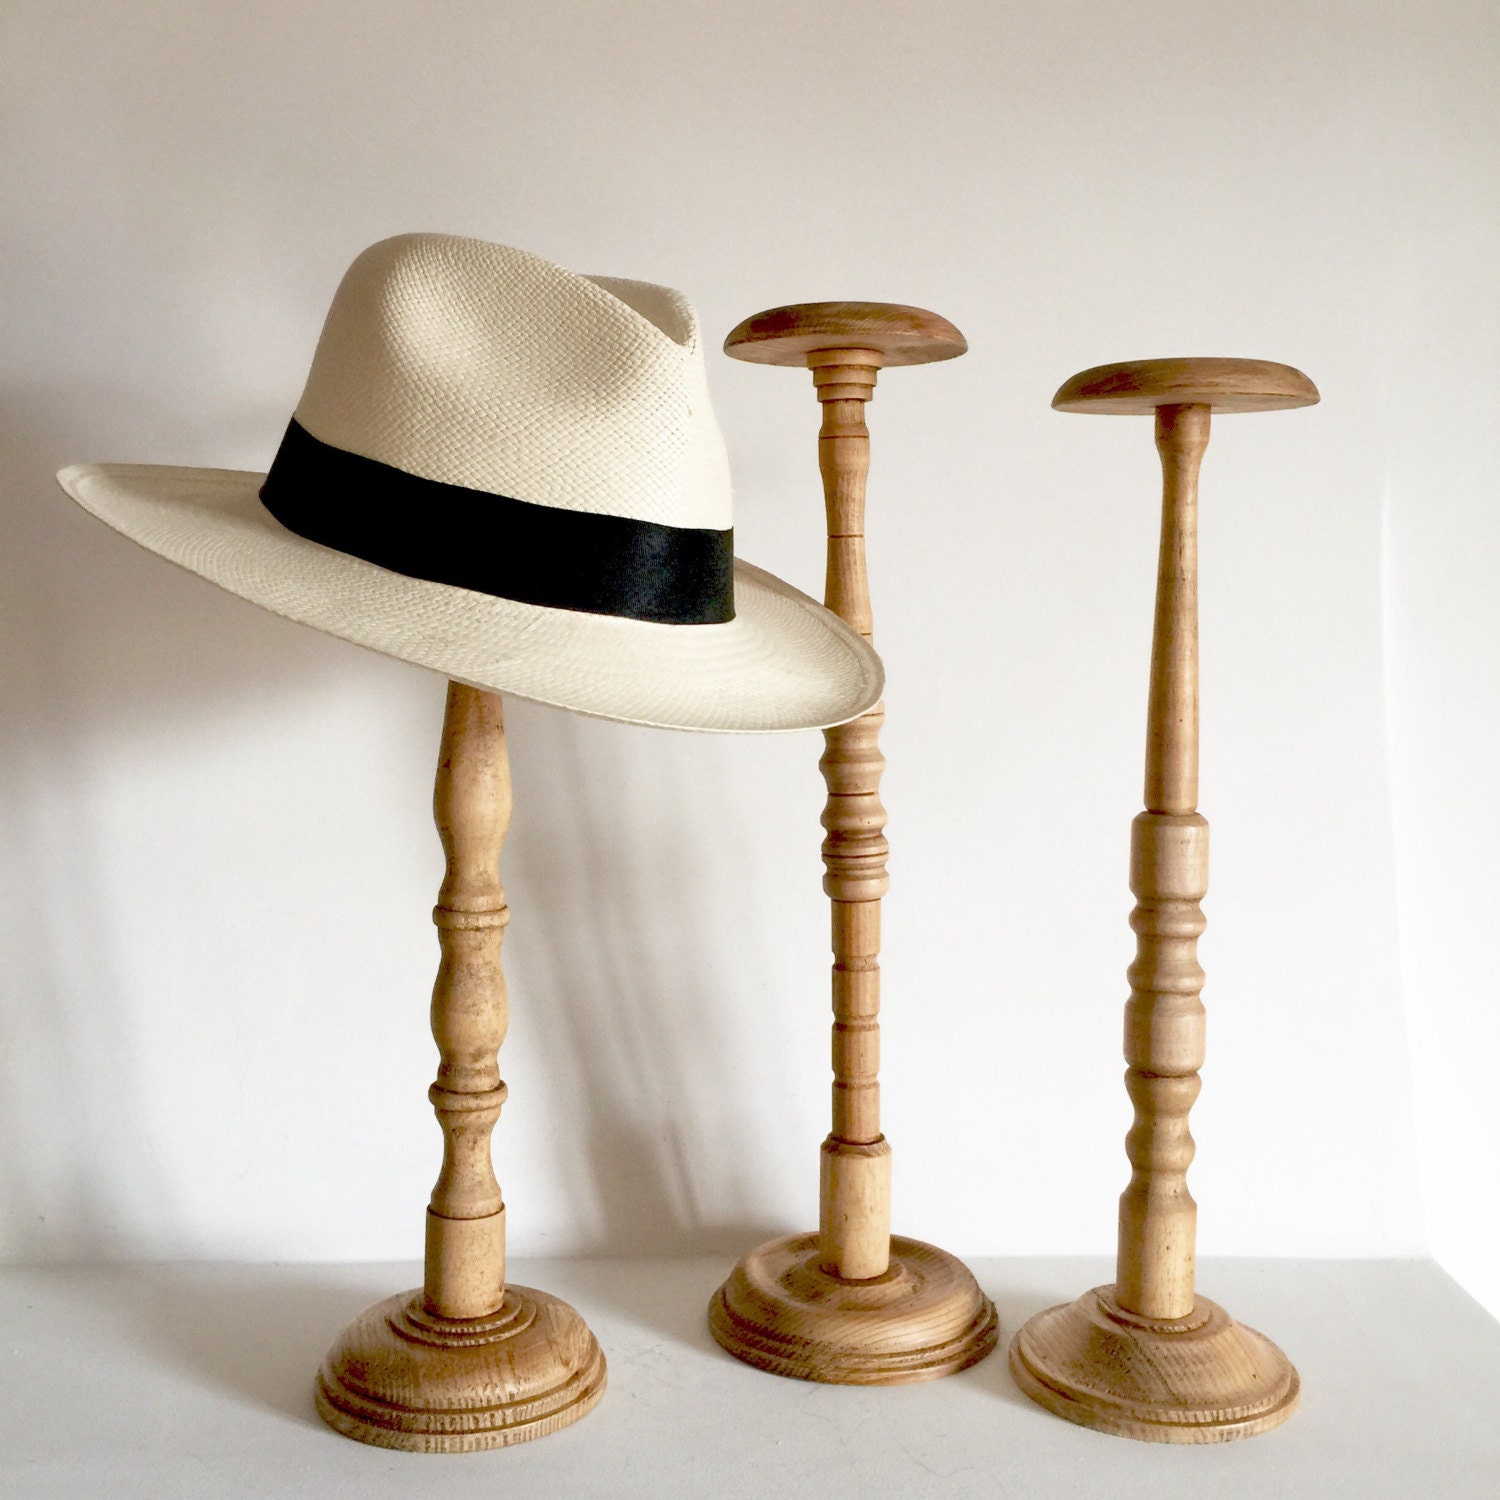 RESERVED FOR SUNETTE - French Antique Wood Hat Stand - Tall Hat stands ...